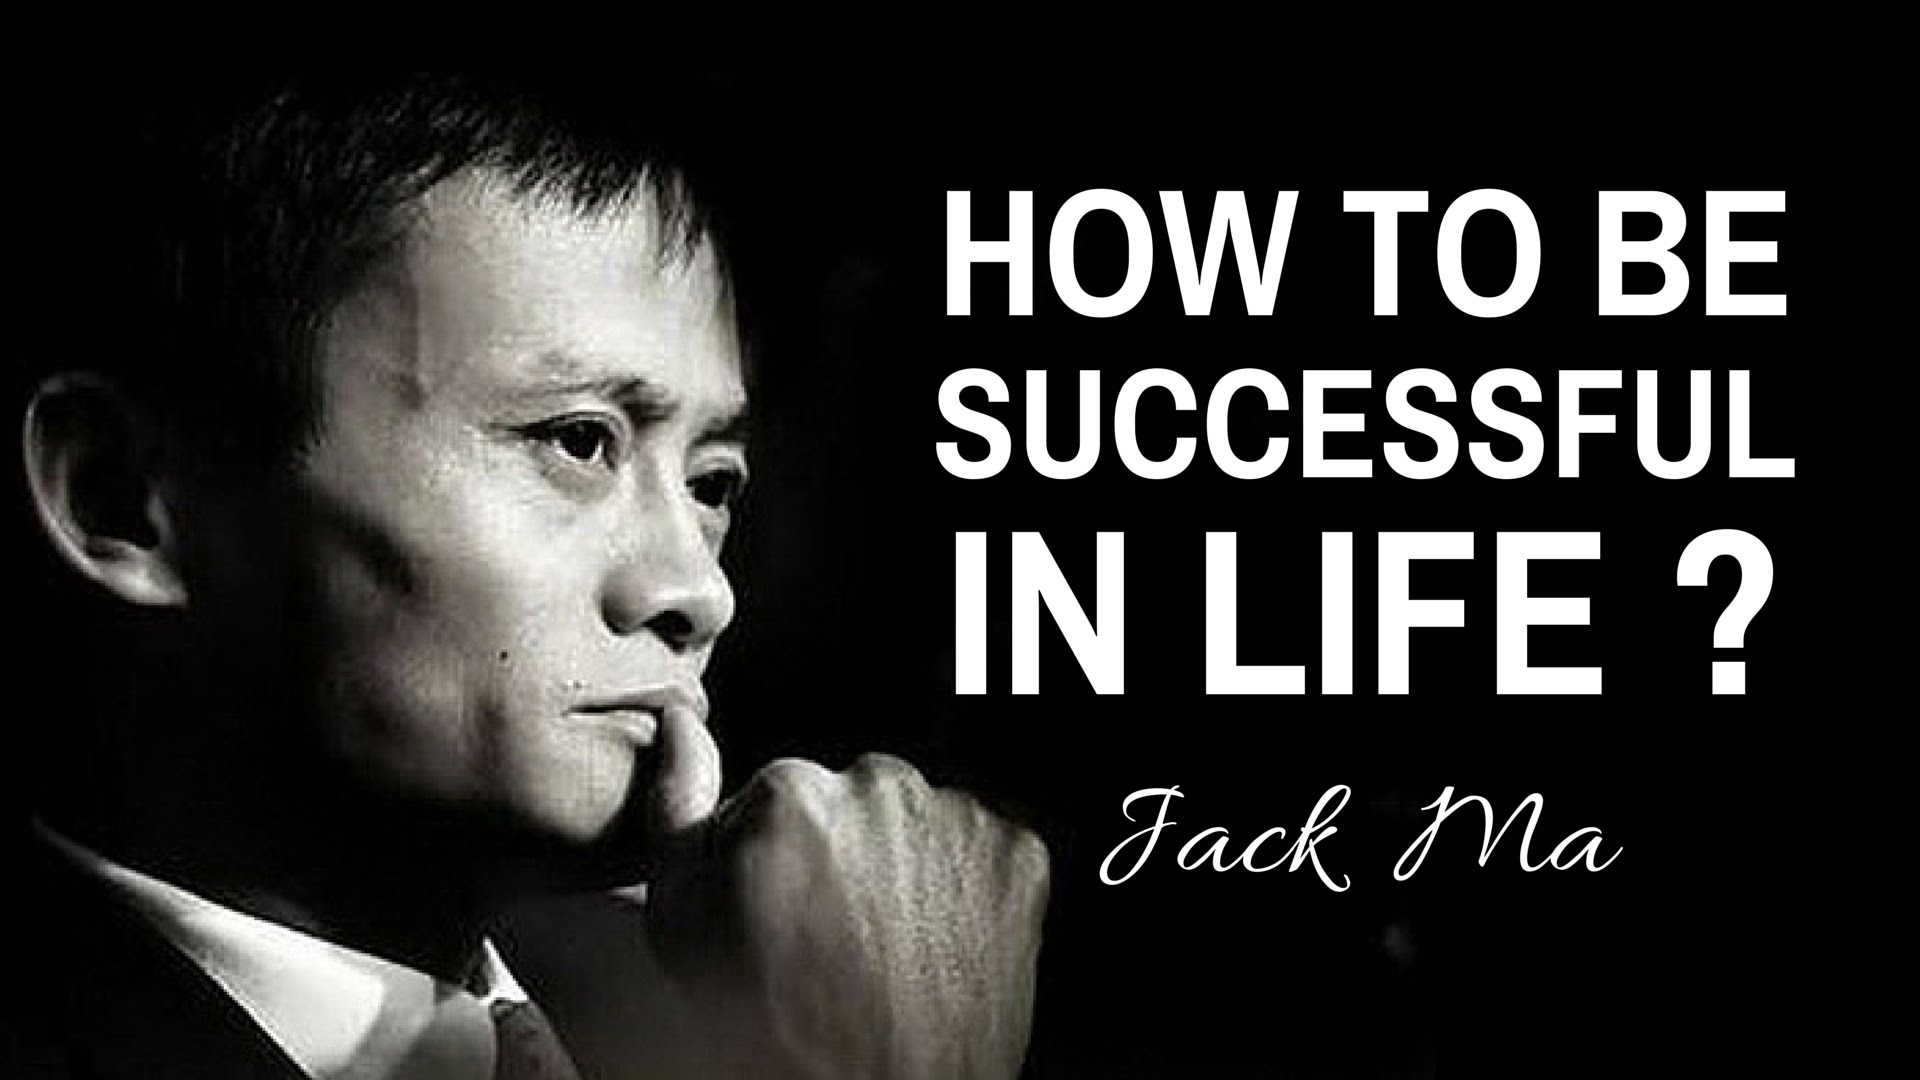 Jack Ma S Speech On How To Be Successful Is Inspiring